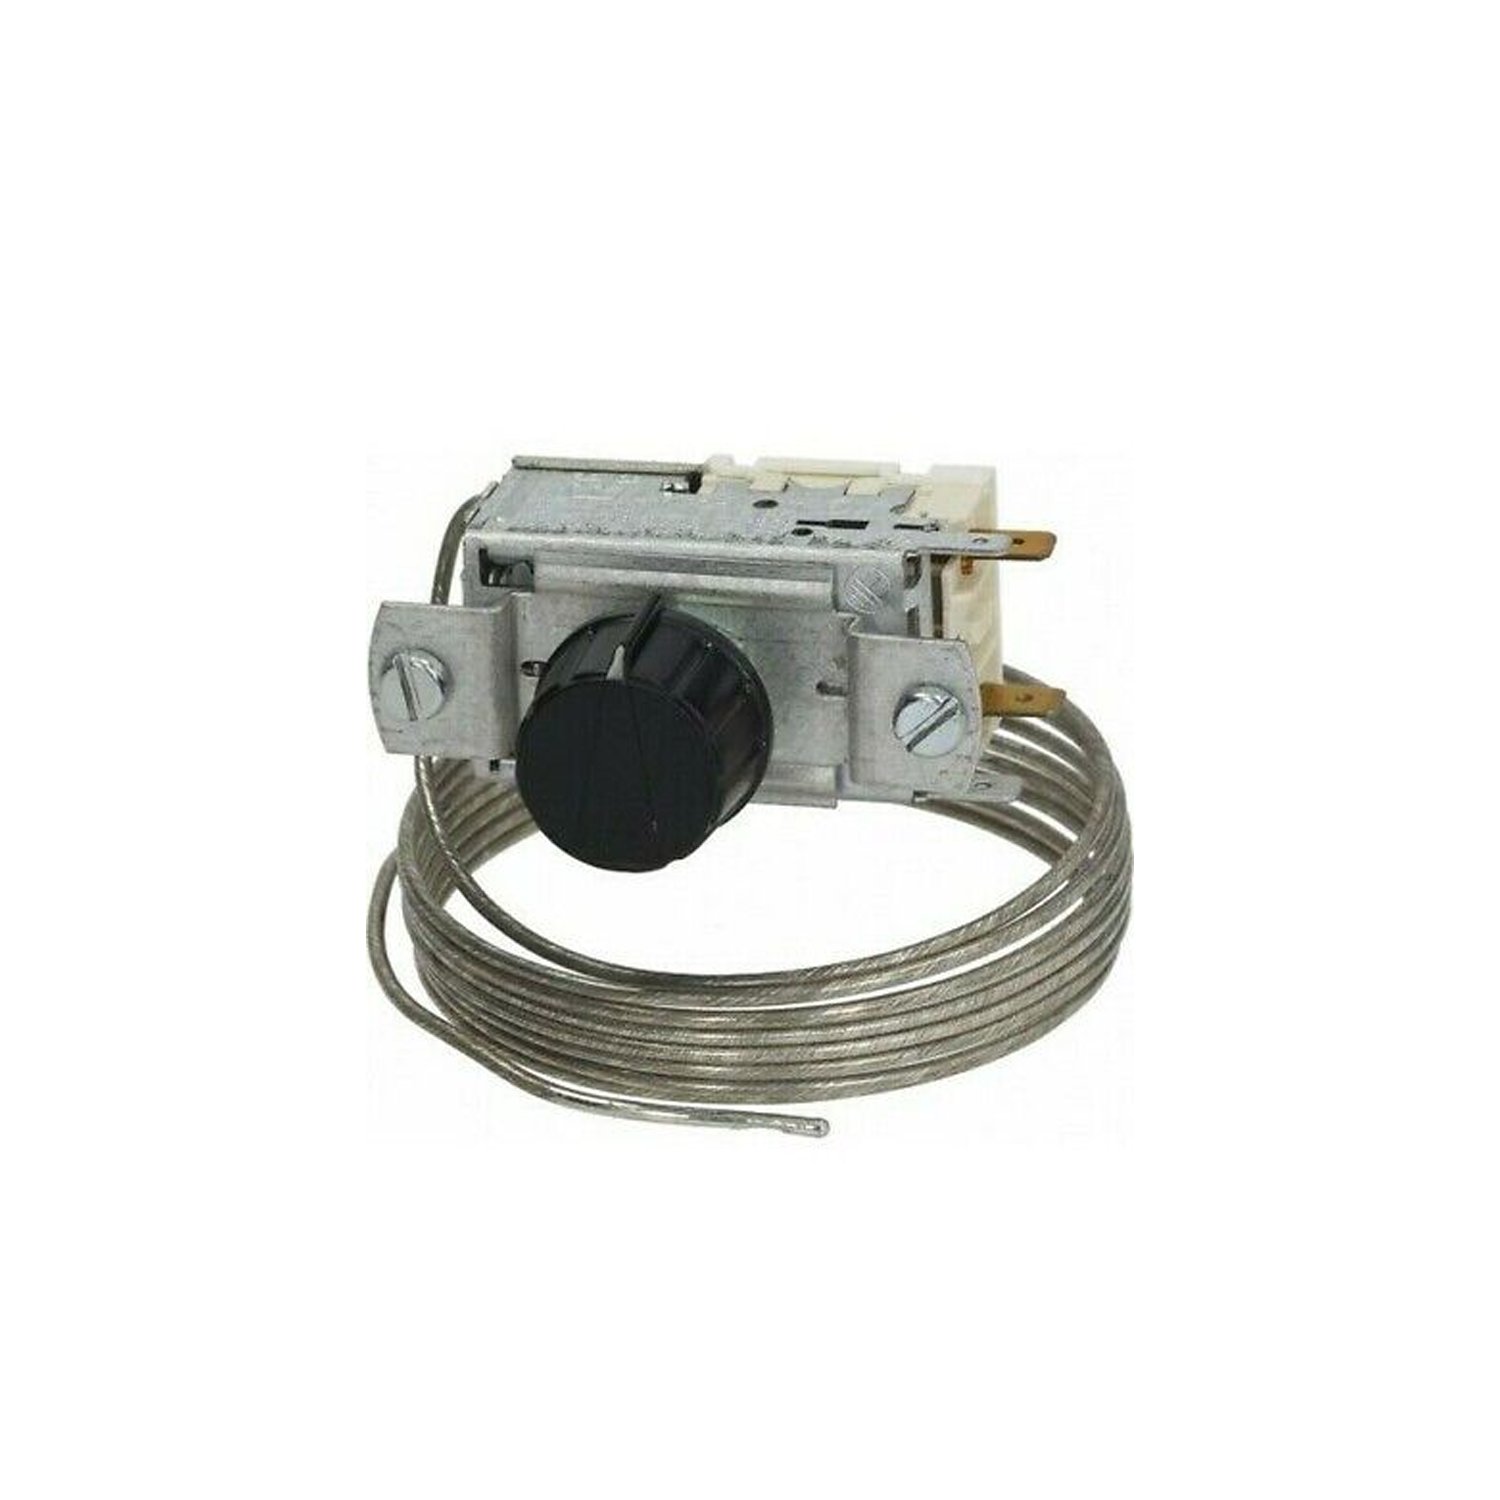 THERMOSTAT RANCO K50-P1560,2 contacts 6A 250V Capillary tube 2000 mm cold -5°C, warm +12°C - DT9°C crescent-shaped pin ø 6 x 4.6 mm